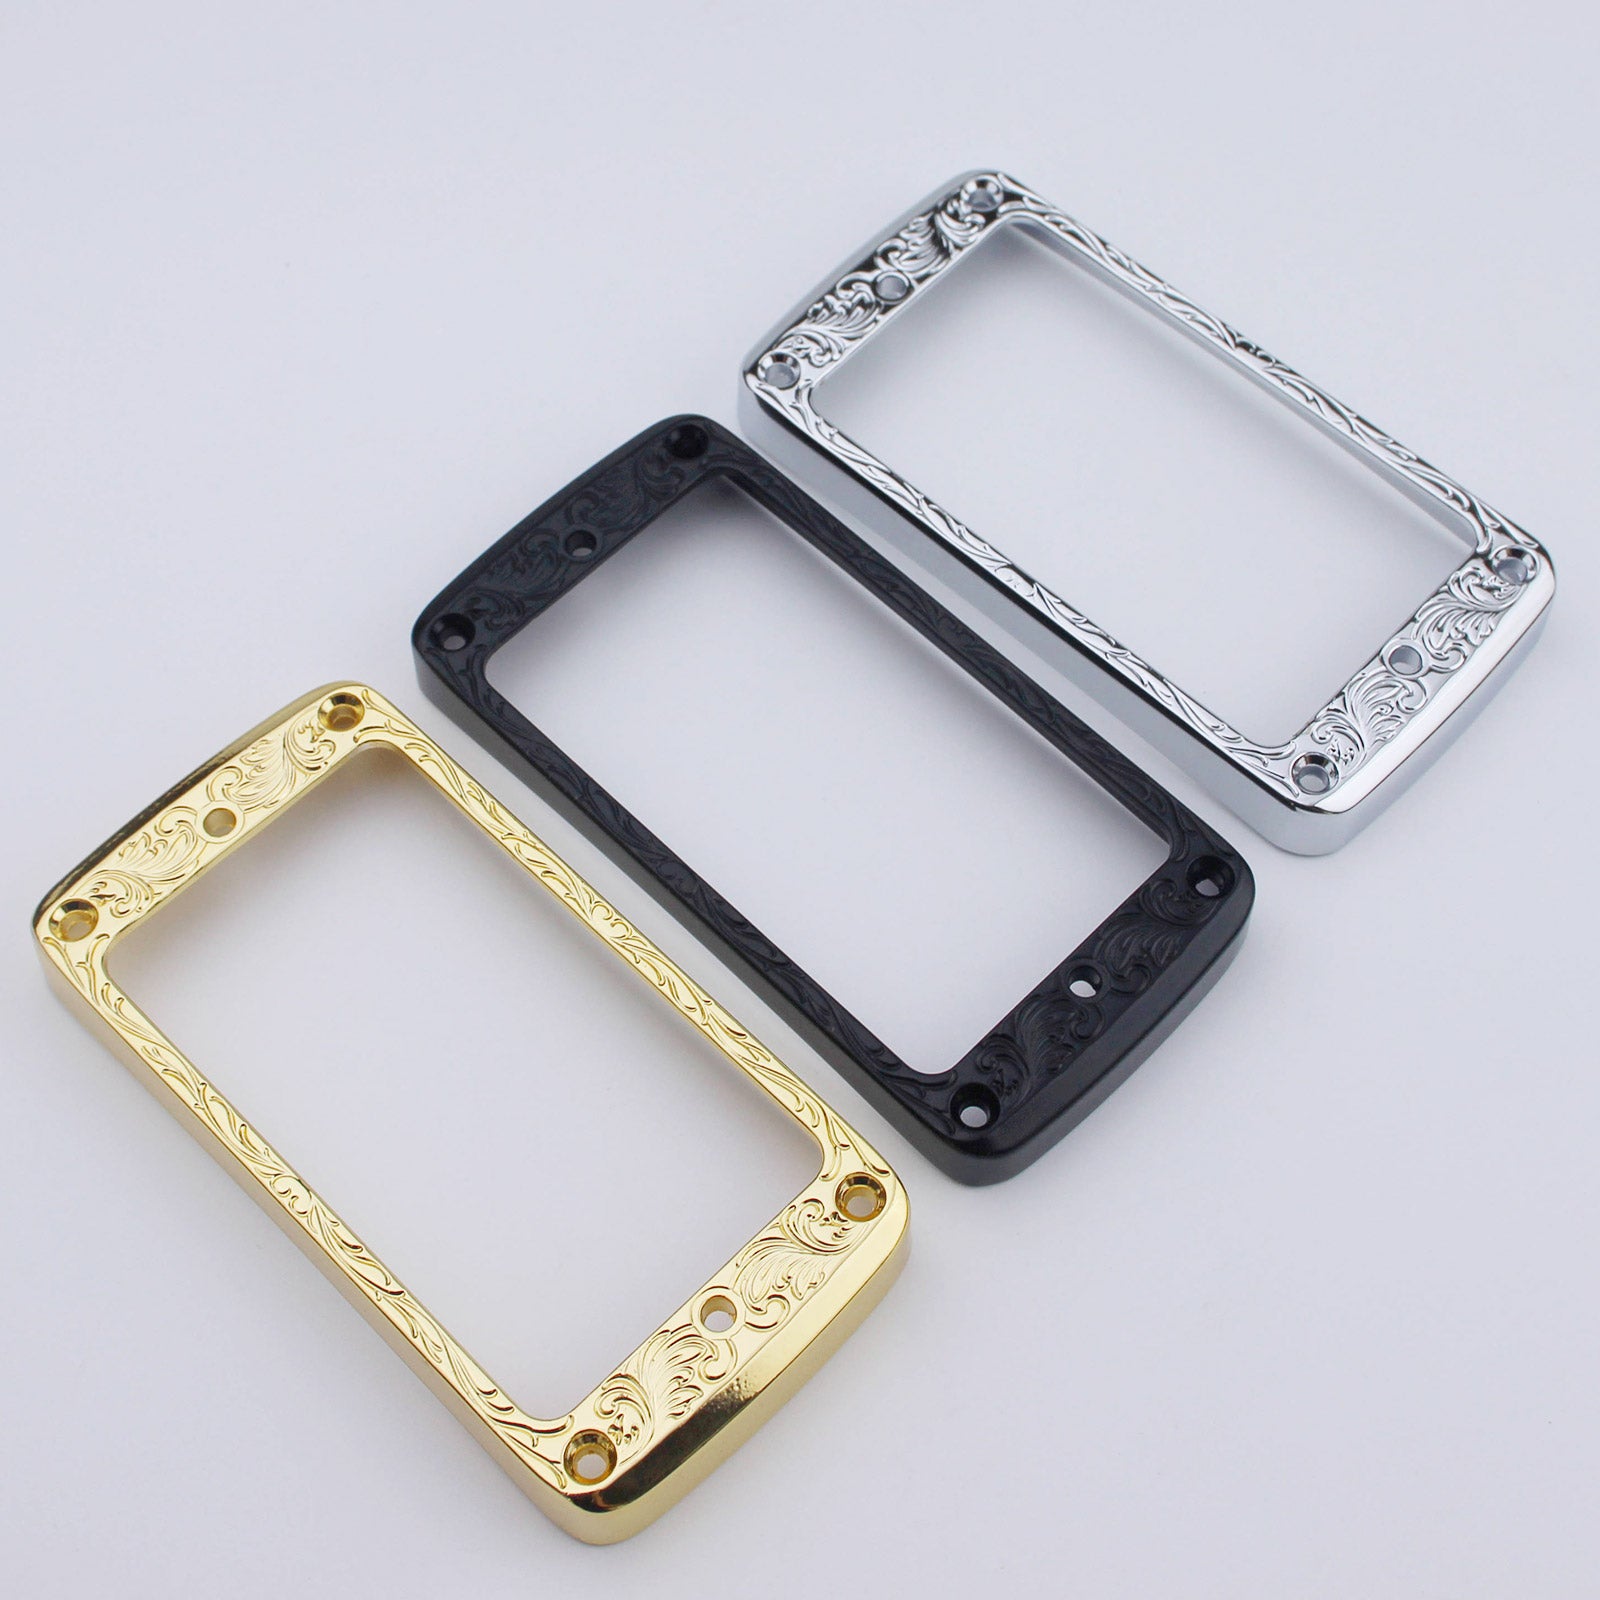 2PCs Pickup Mounting Rings For Humbucker Metal Bridge And Neck Pickups Cover Frame Curved Set With LP Electric Guitar